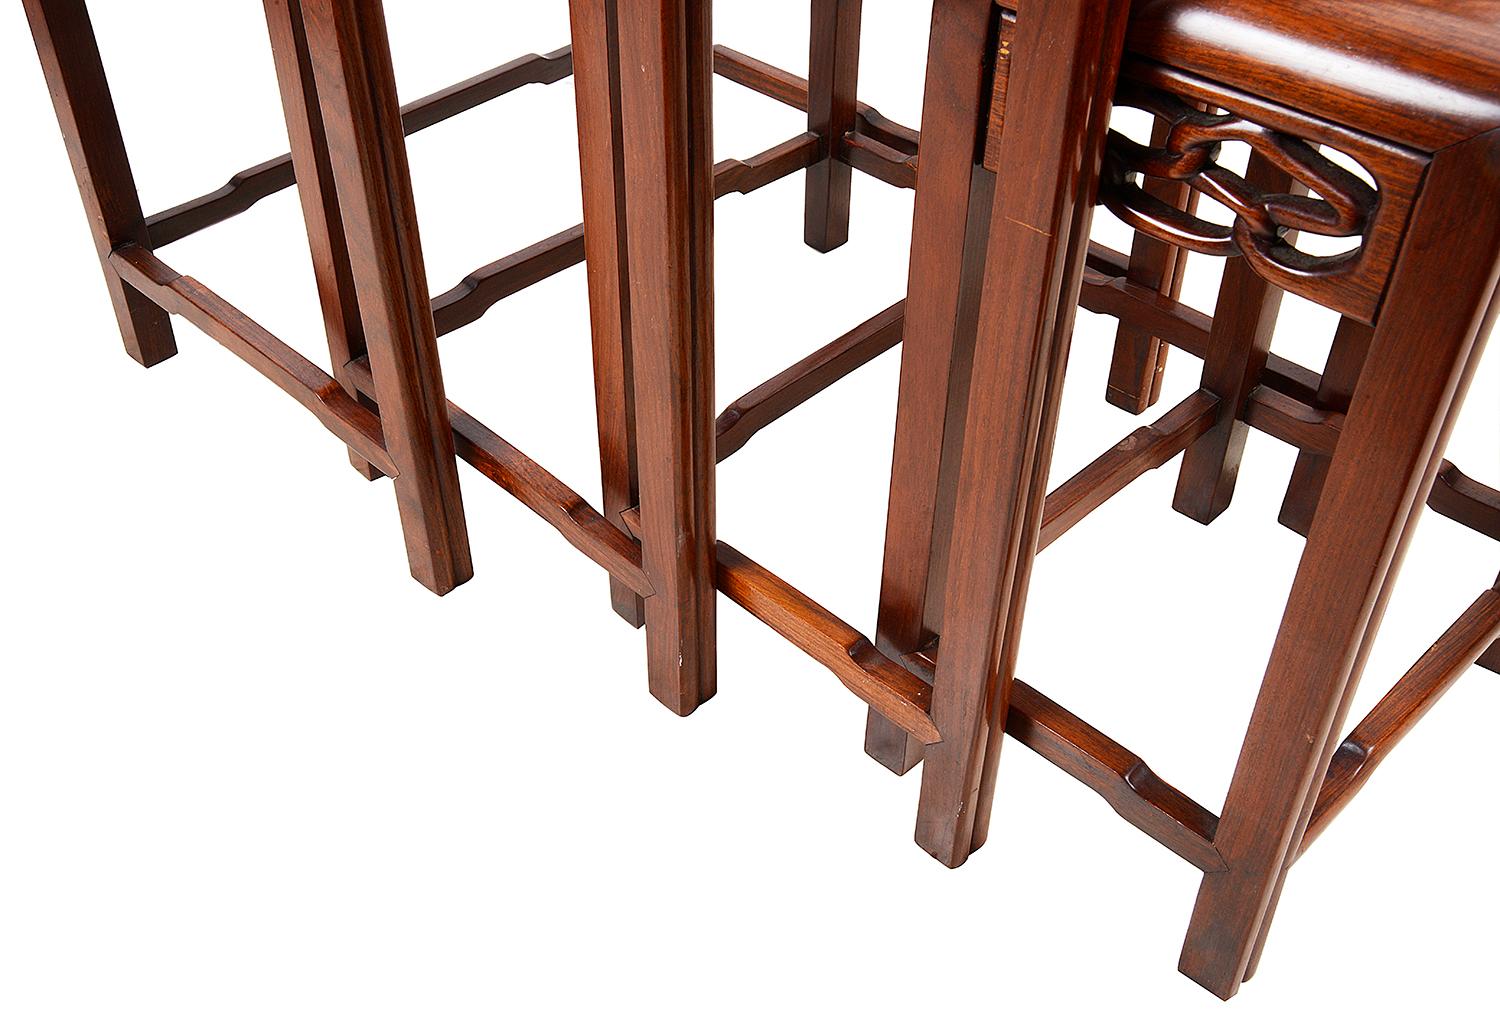 Hand-Carved Nest of Four Chinese Hardwood Tables, 19th Century For Sale